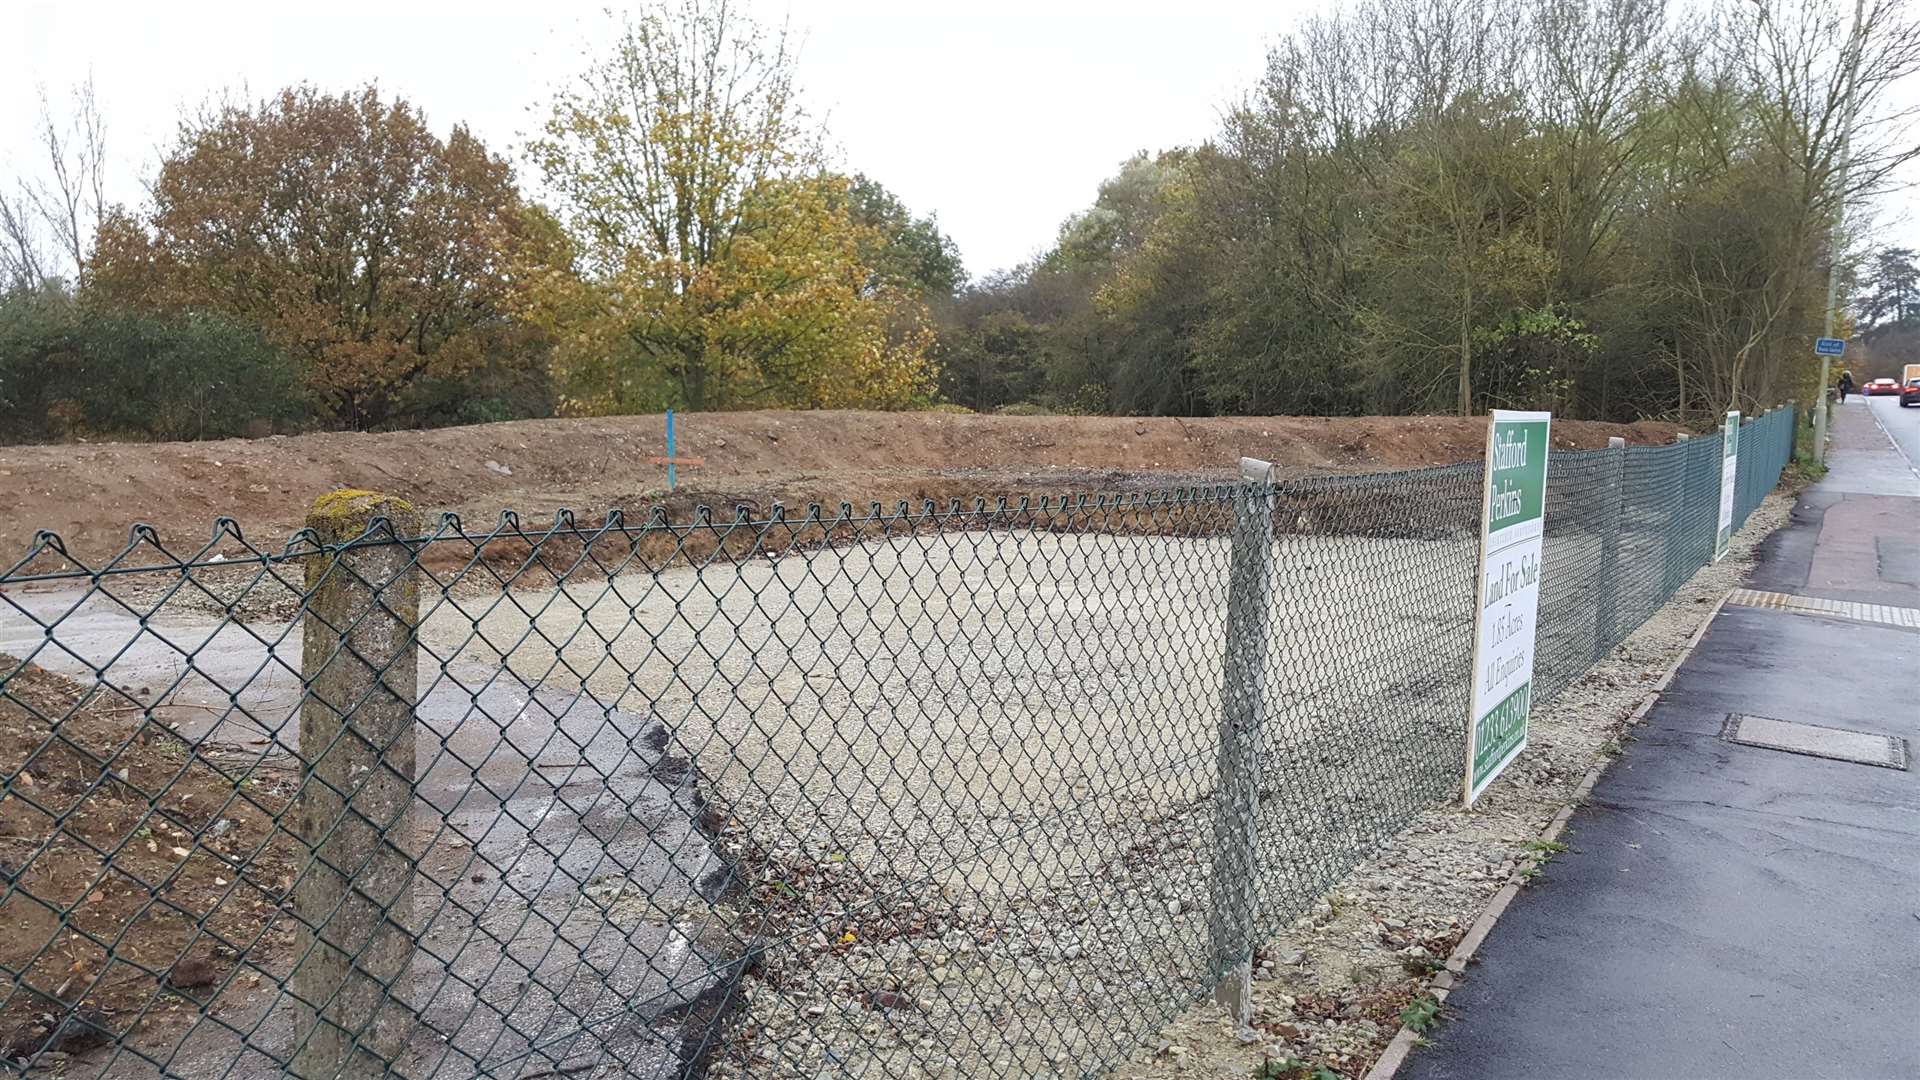 The site off Canterbury Road has gone up for sale